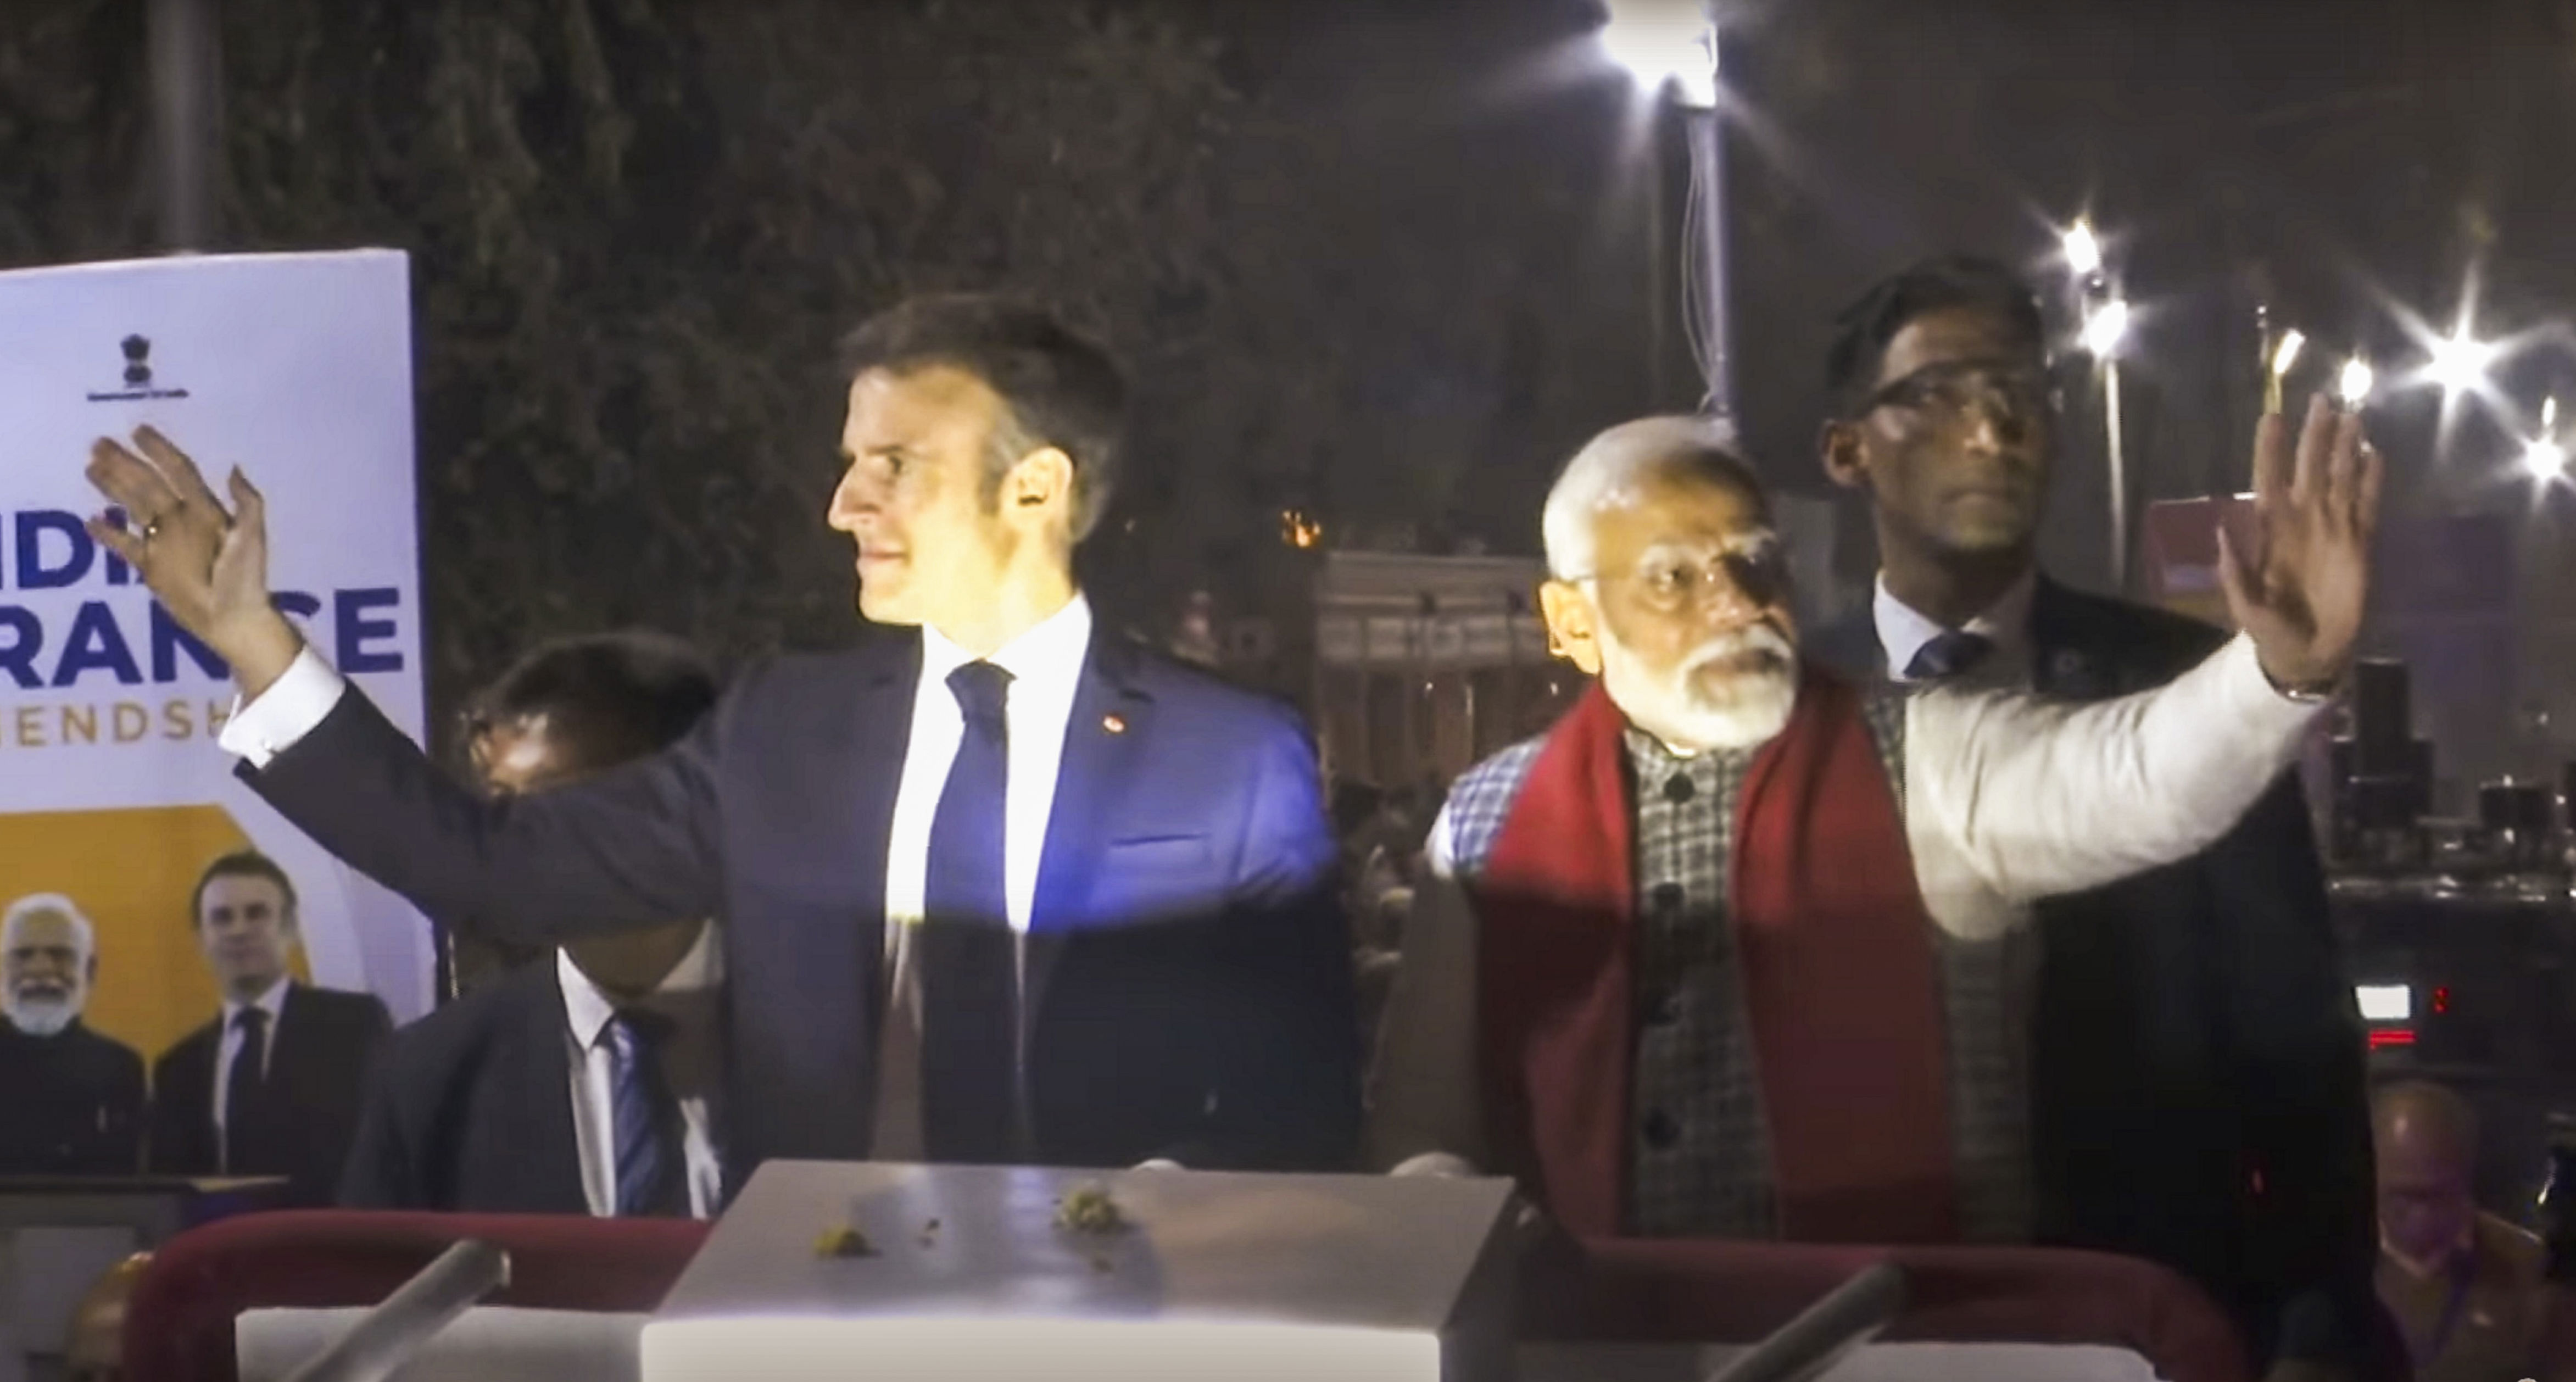 when macron met modi: french leader joins pm in roadshow, gets ram temple replica as gift